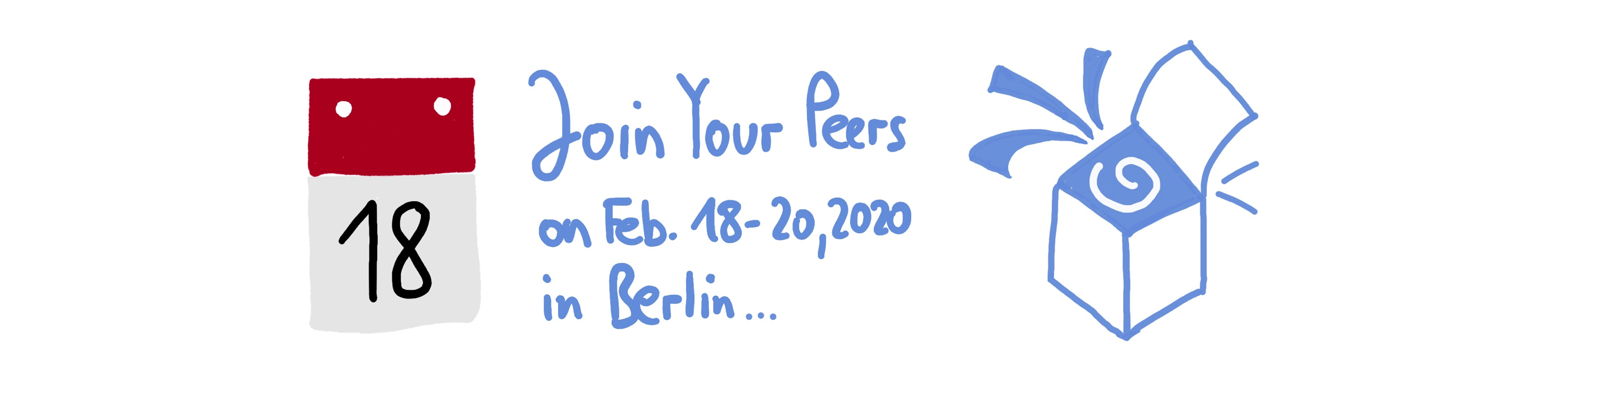 PSM I and Liberating Structures Training Class in Berlin, February 18-20, 2020